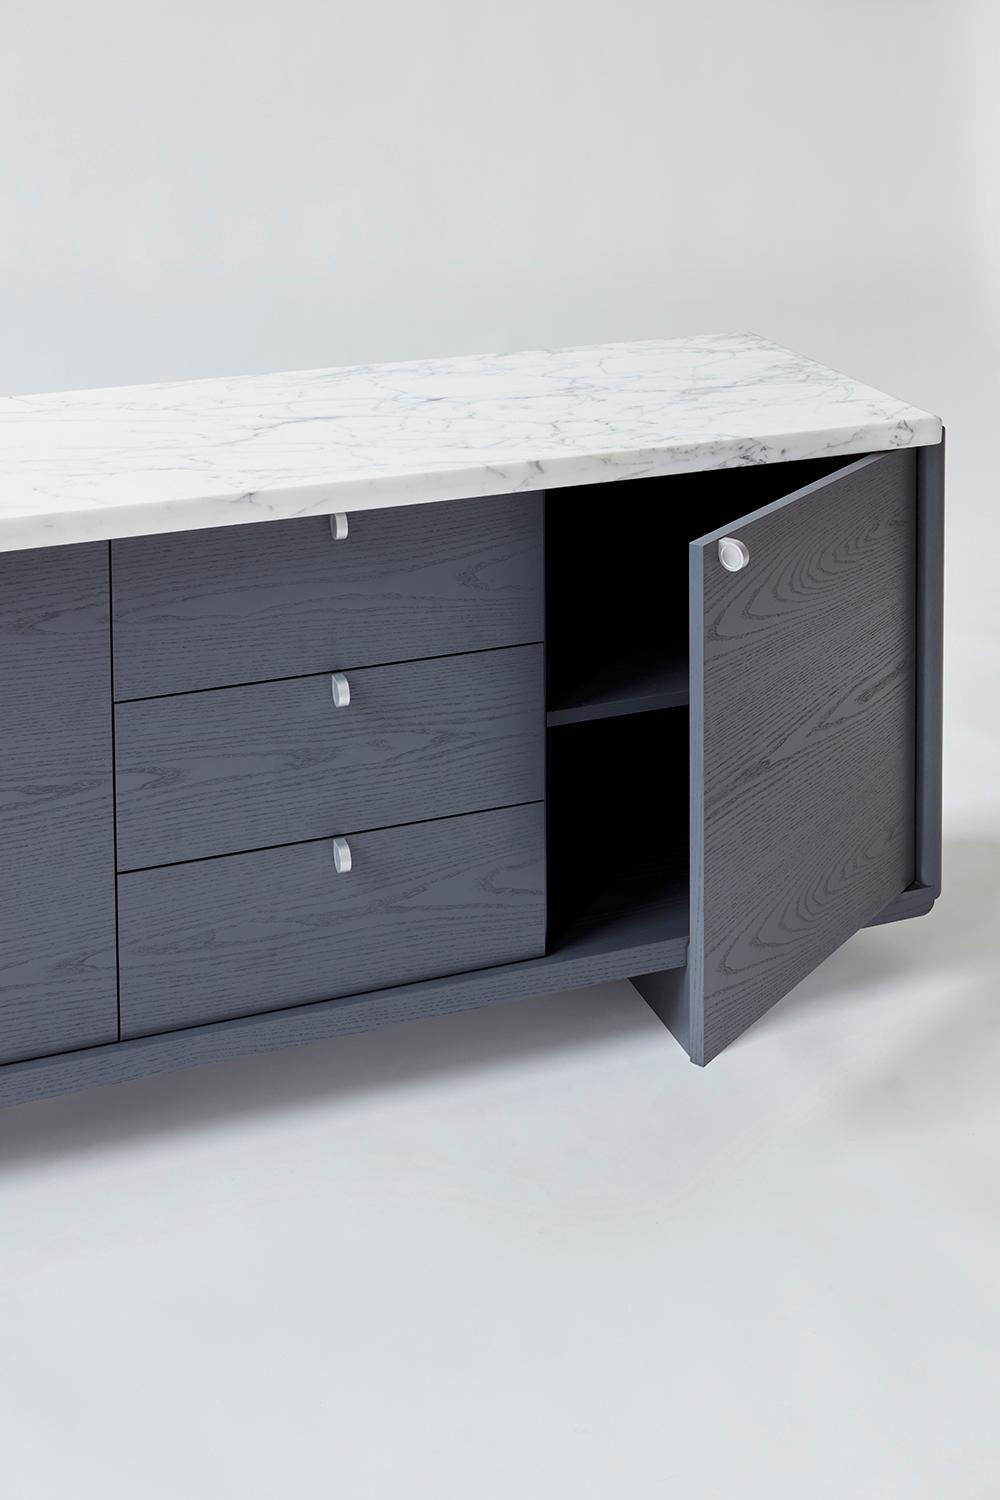 Nocturne credenza with slate lacquer finish and Calacatta marble. The newest edition in our Nocturne series of case pieces, utilizing a considered material pallet of Calacatta marble, solid ash with a slate lacquer finish and brushed/waxed aluminum,